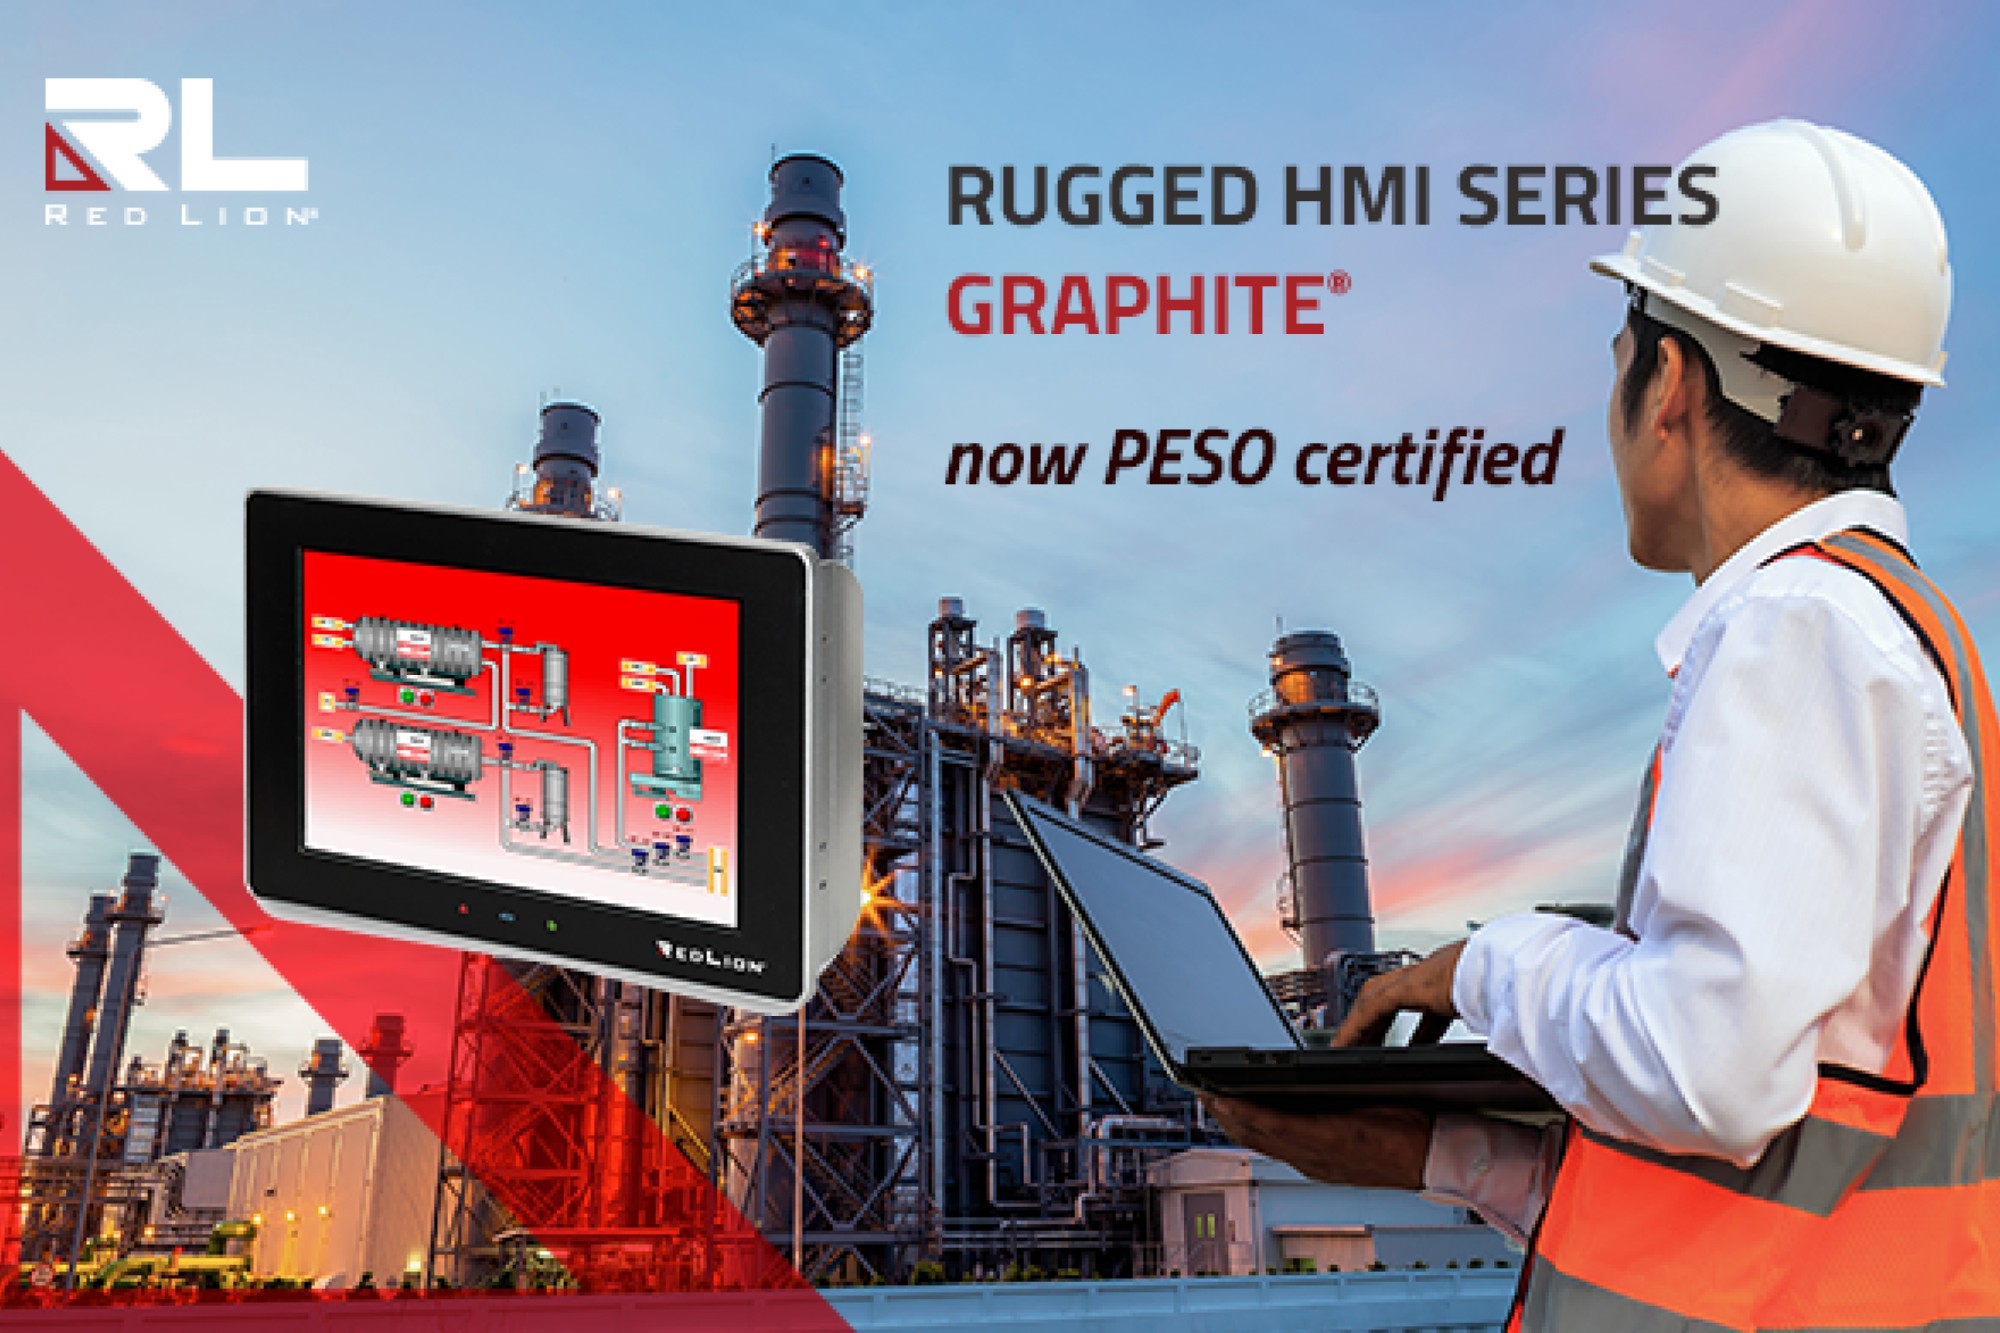 Graphite Panel Series by Red Lion receives PESO Certification in India